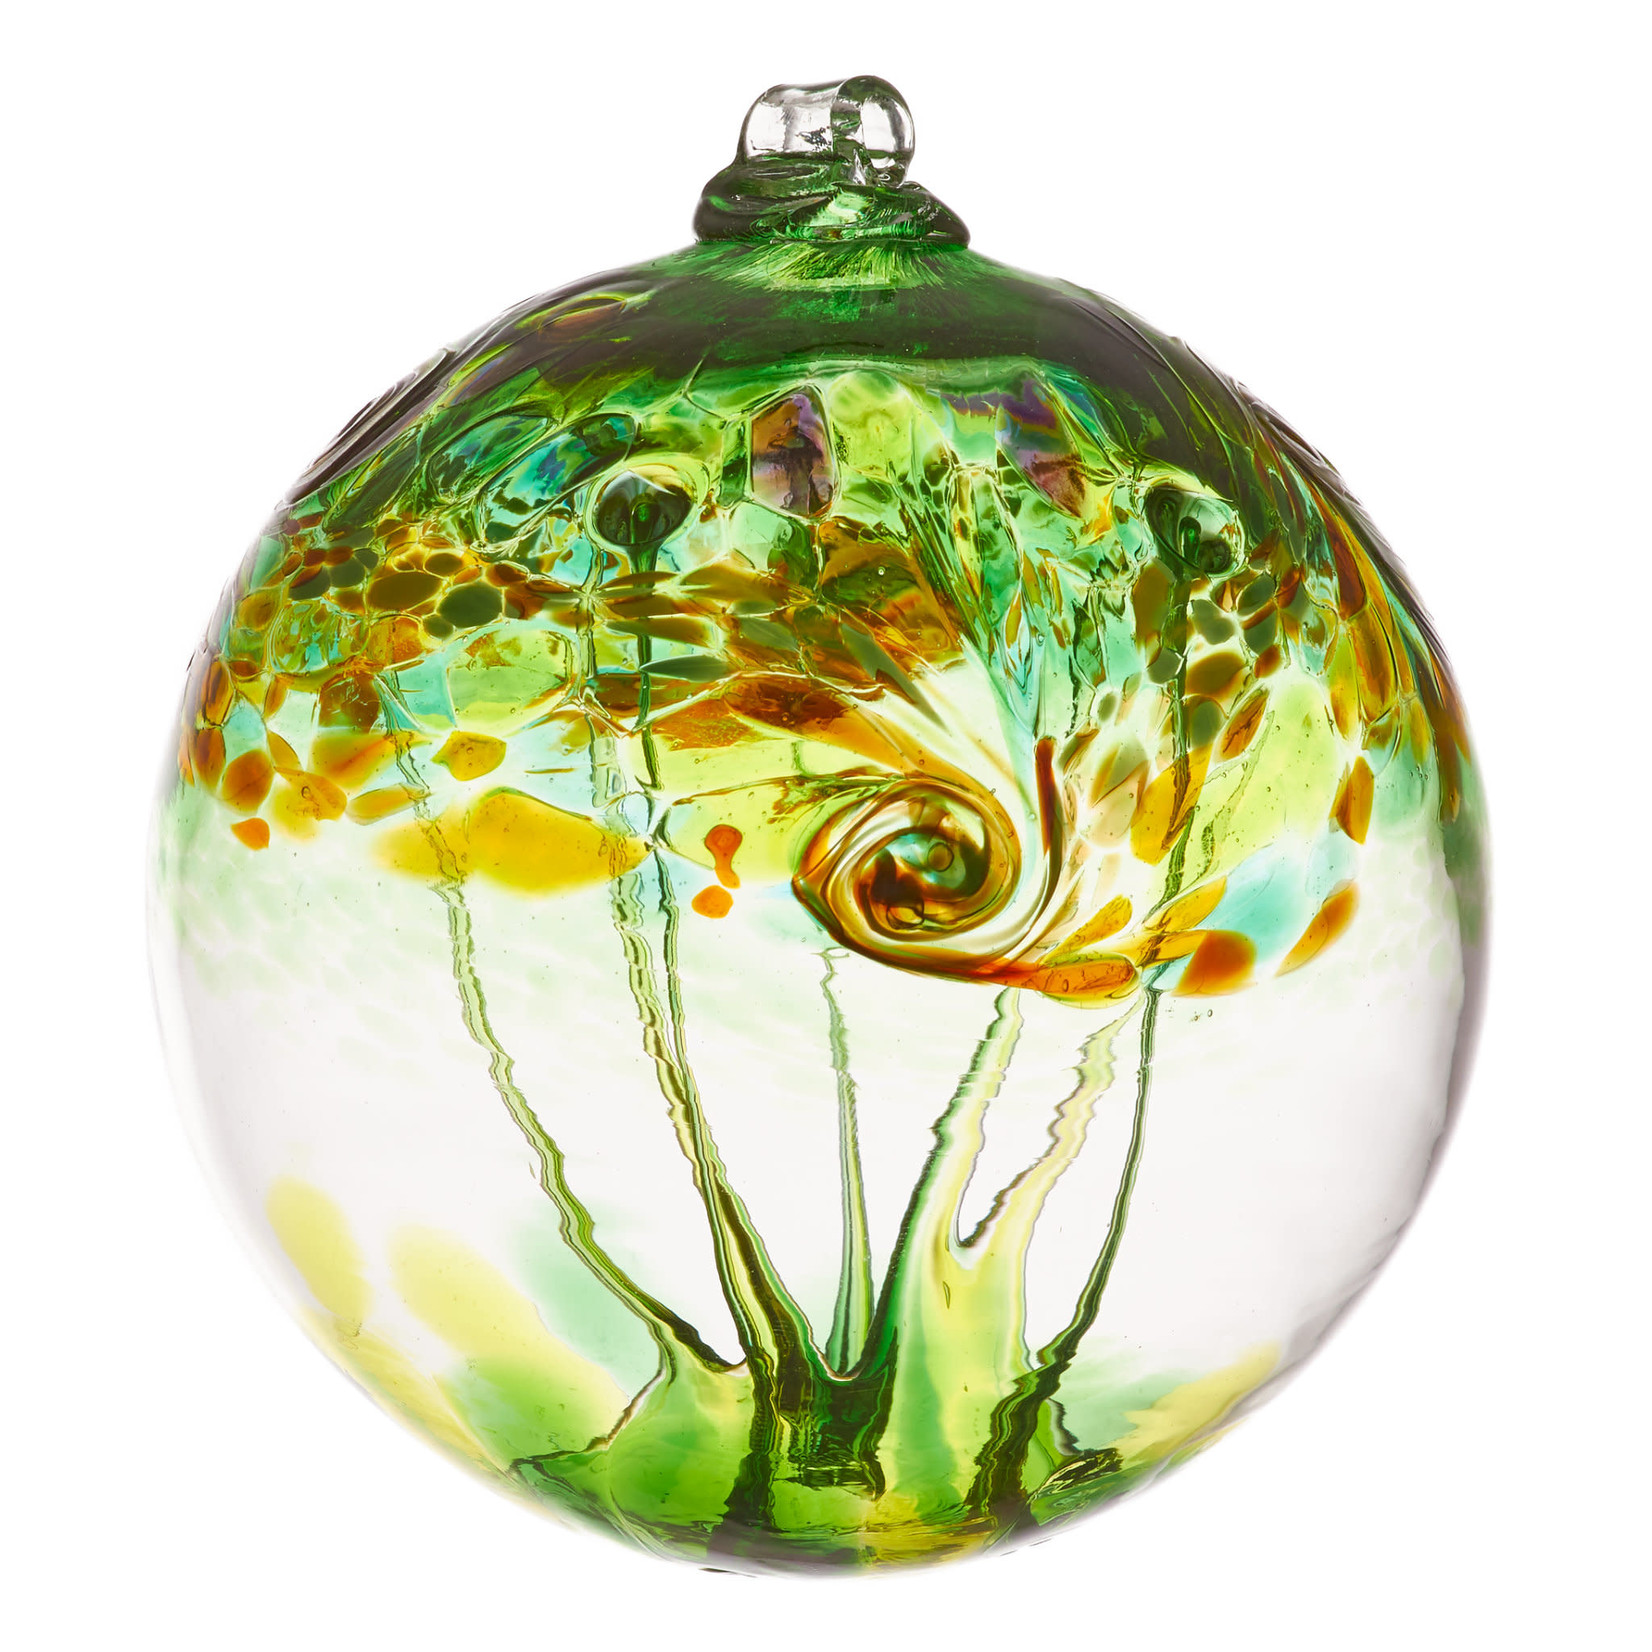 KITRAS 6" GLASS ORB - ELEMENTS COLLECTION